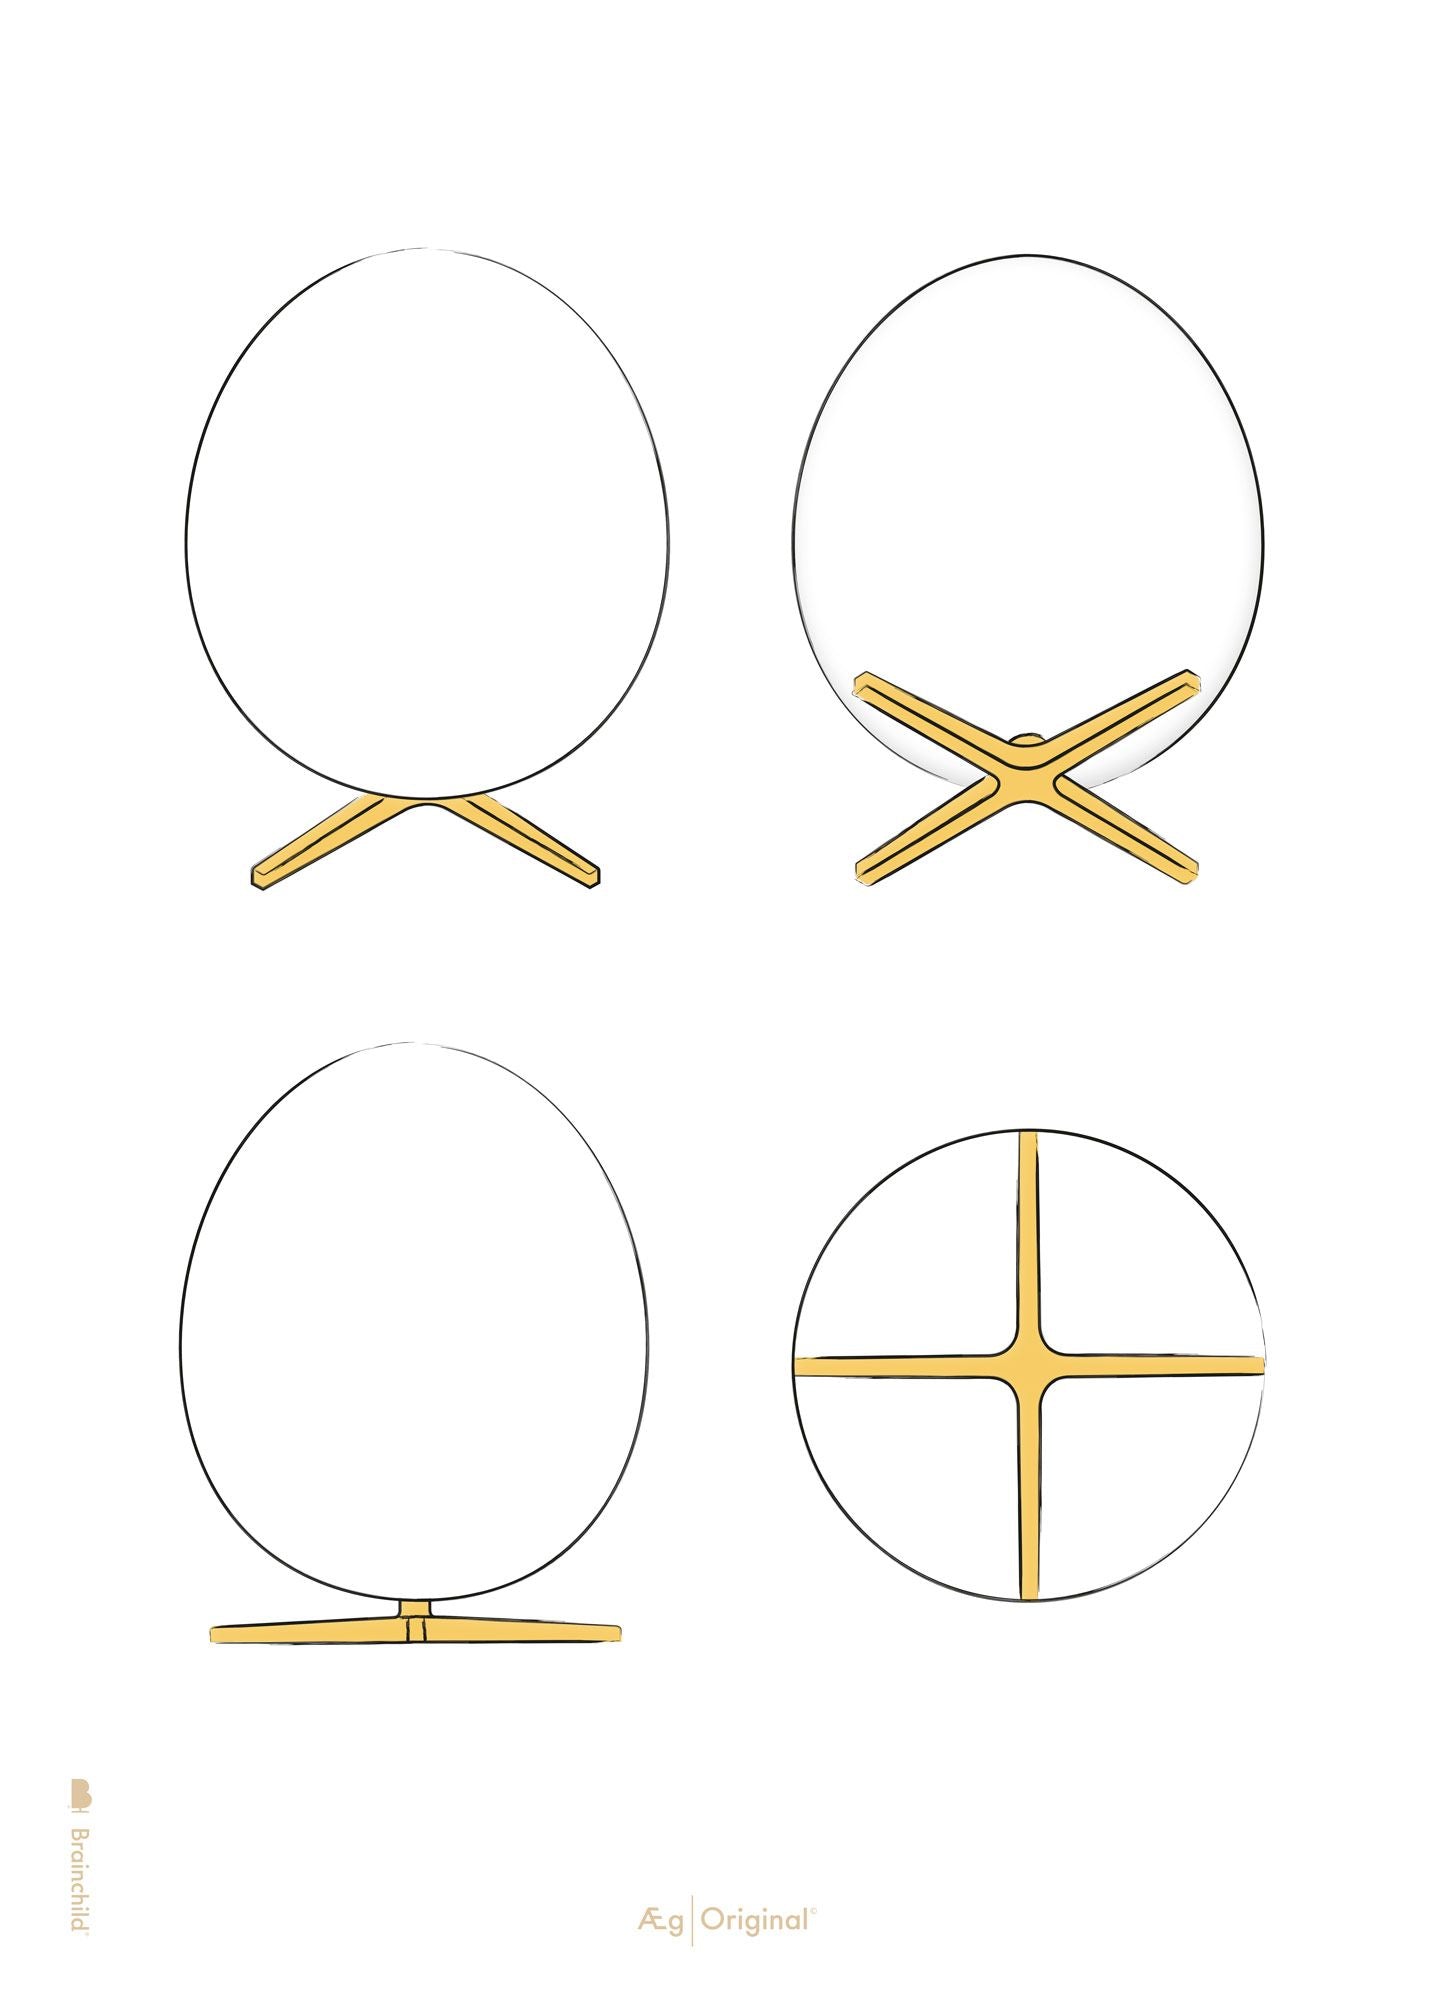 Brainchild The Egg Design Sketches Poster Without Frame A5, White Background